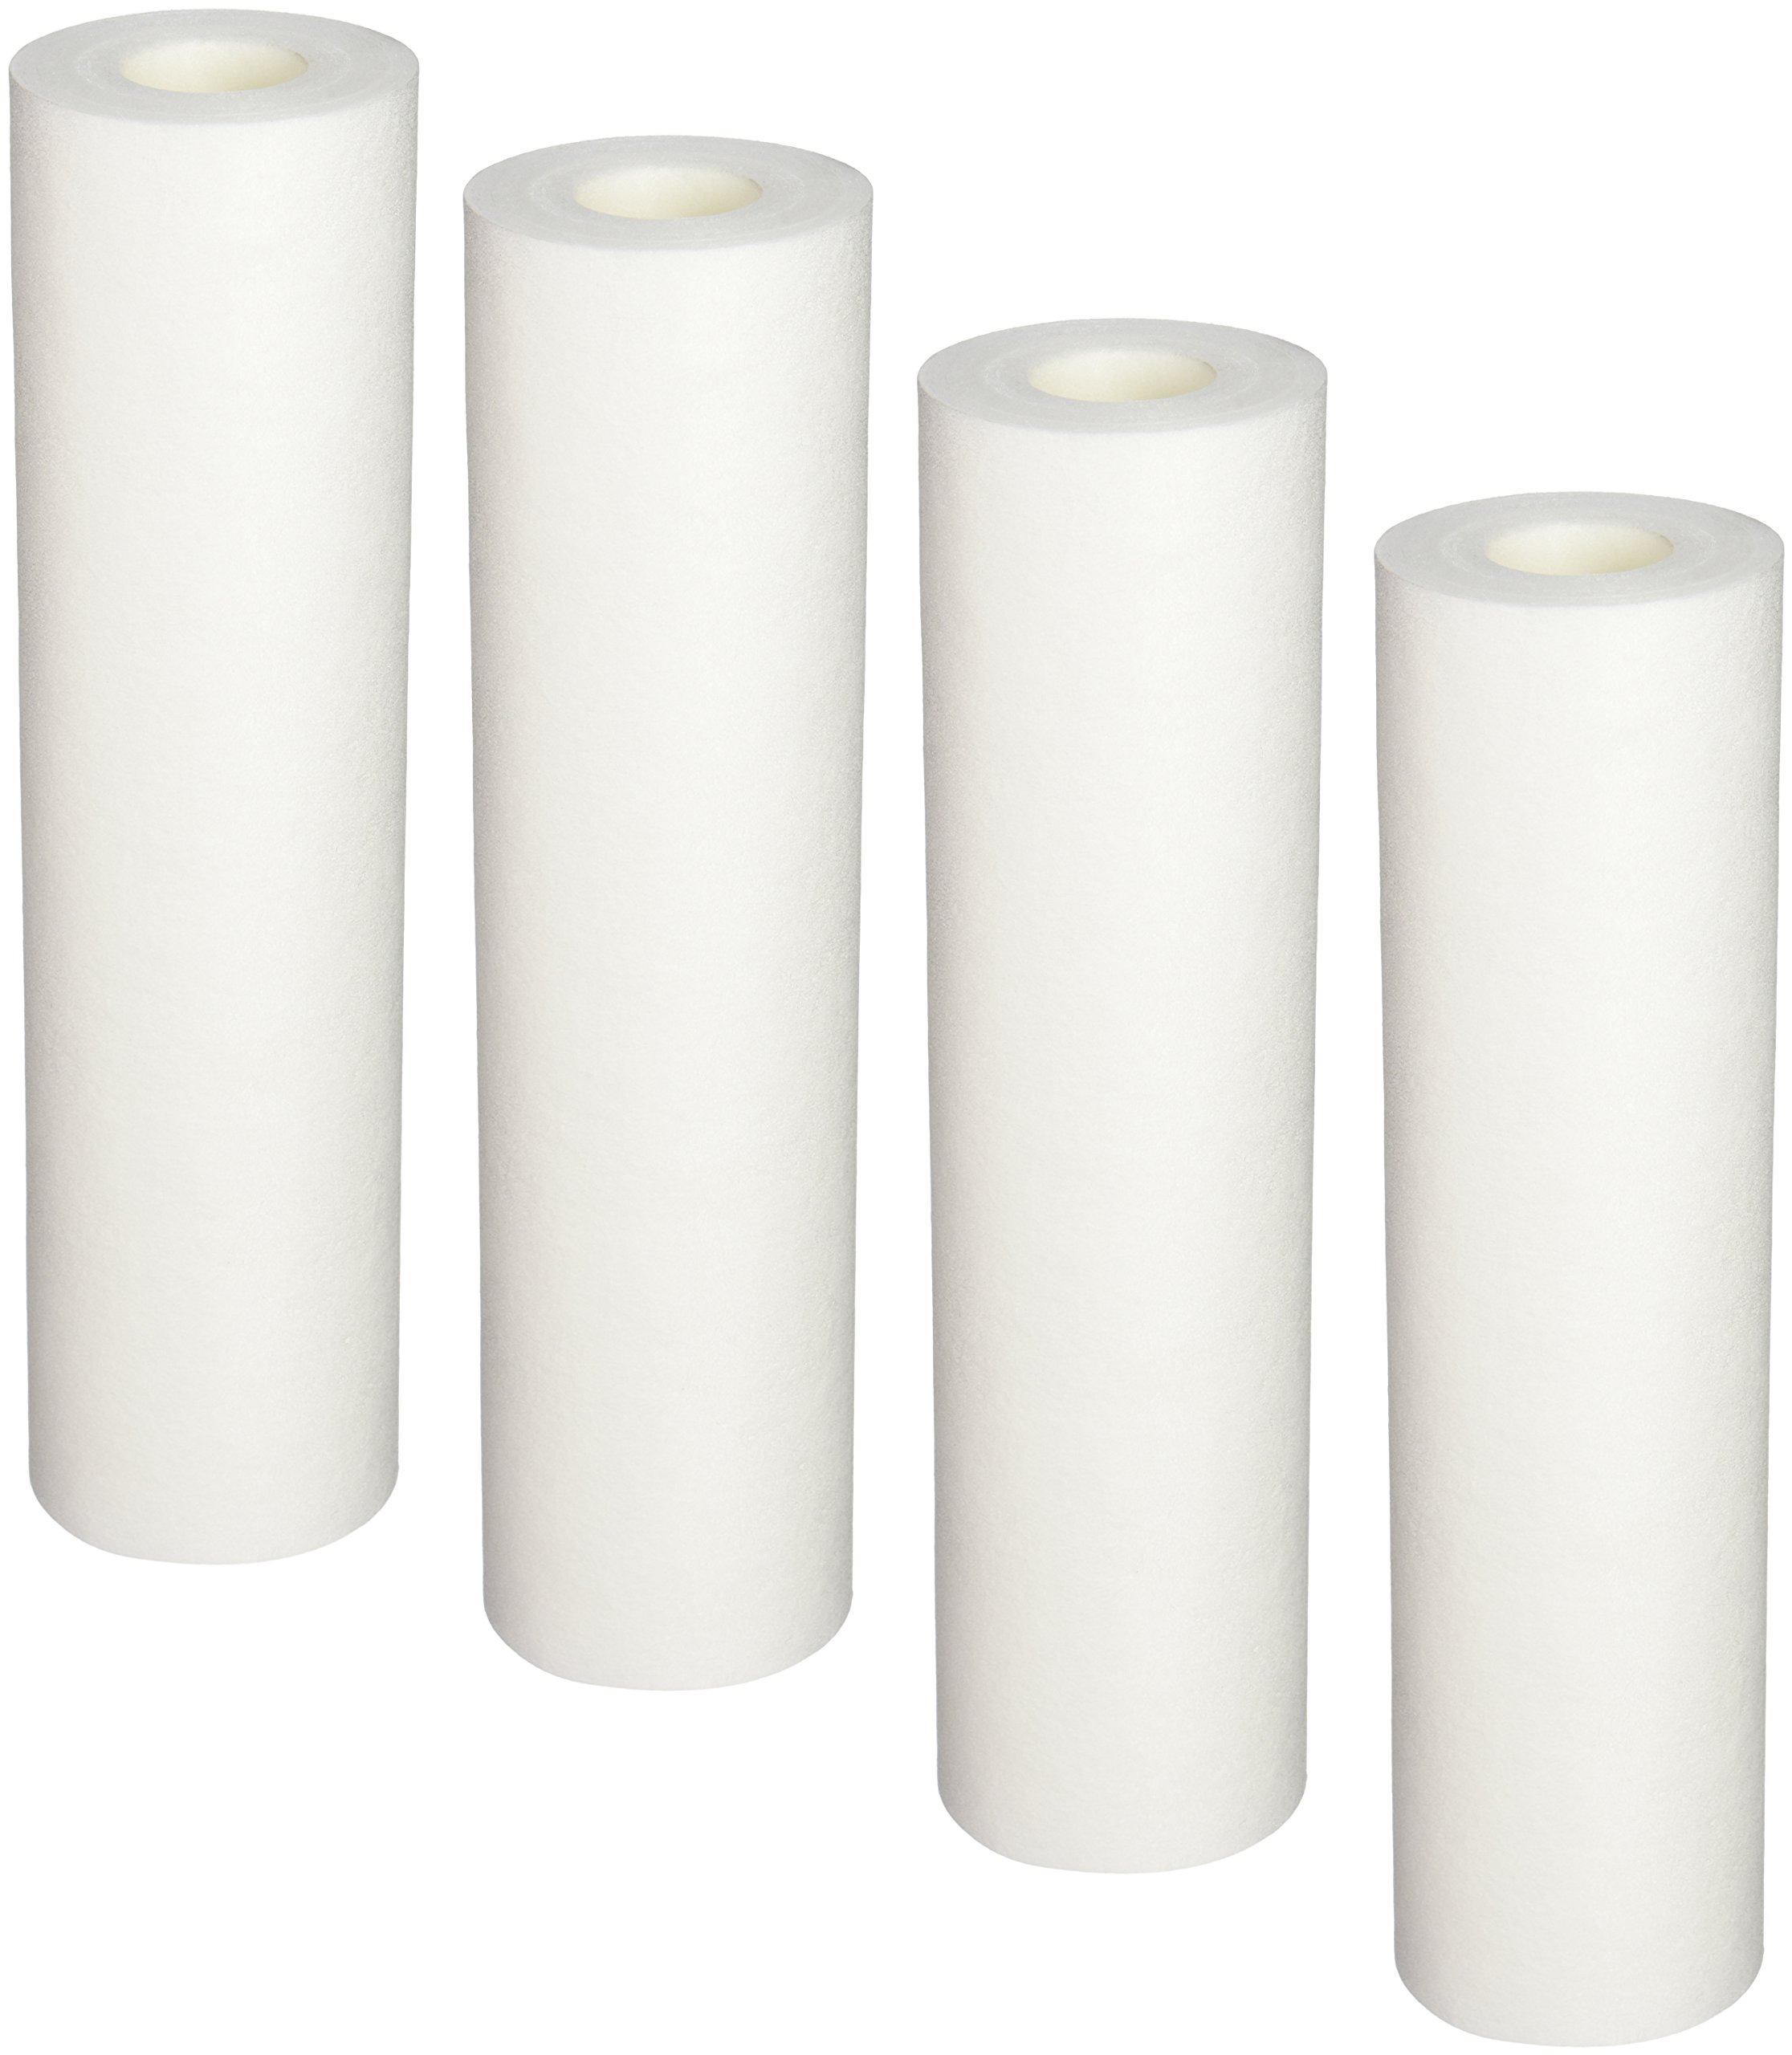 Aquasana EQ-304 Replacement 10-Inch, Sediment Pre-filters for Whole House Water Filter Systems, White,4-pack